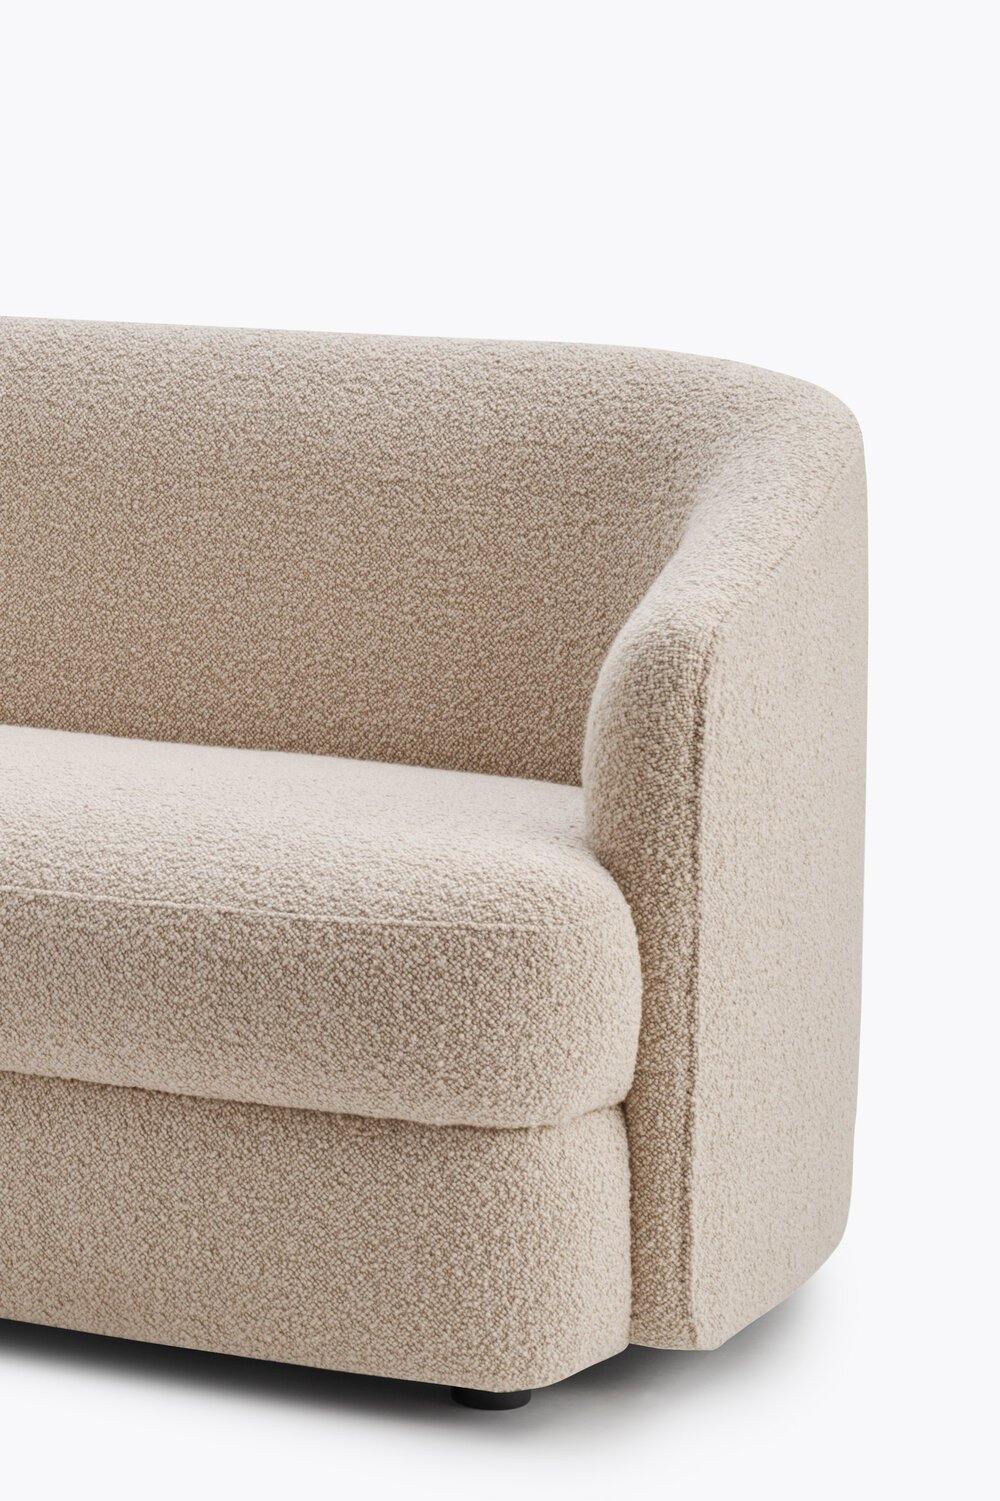 Covent Sofa Deep | 2-seater - The Design Part